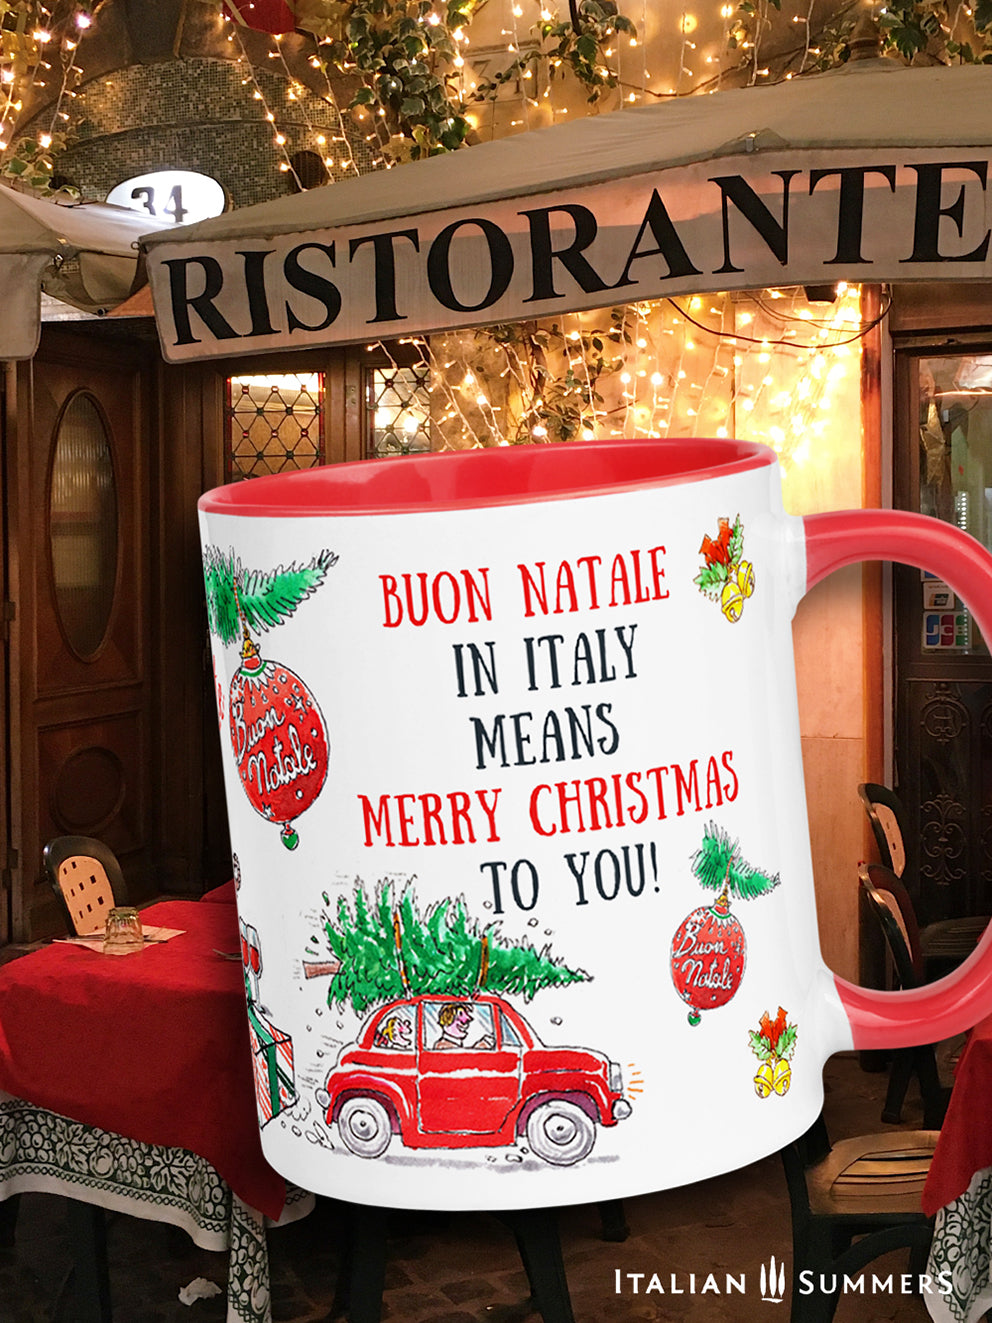 Italy Christmas mug  With a charming Italian-inspired design featuring all the traditional trimmings of an Italian Christmas, it'll have you singing "Santa Lucia" in no time! Plus, the quote on the mug reads "Buon Natale in Italy means a Merry Christmas to you", making the perfect gift. Made by Italian Summers copyright by Italian Summers